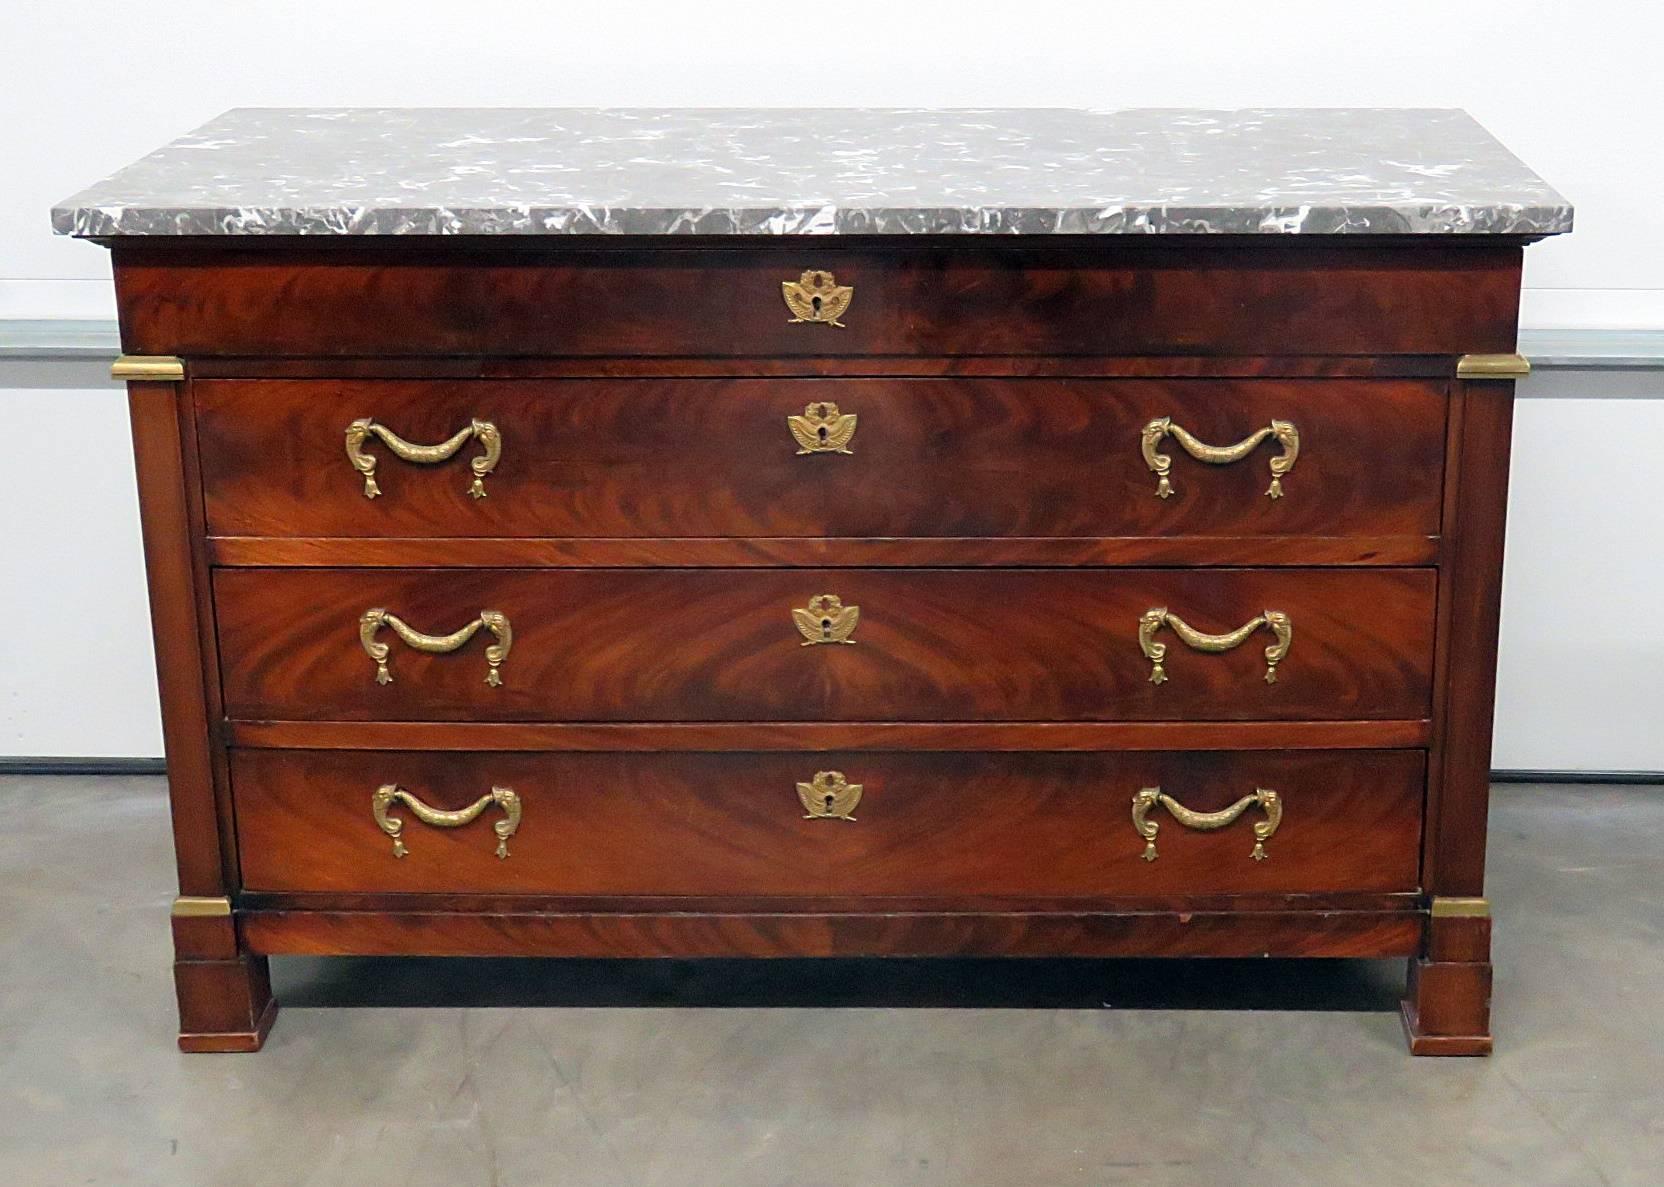 French Empire style marble-top four-drawer commode. Flame mahogany with brass accents.